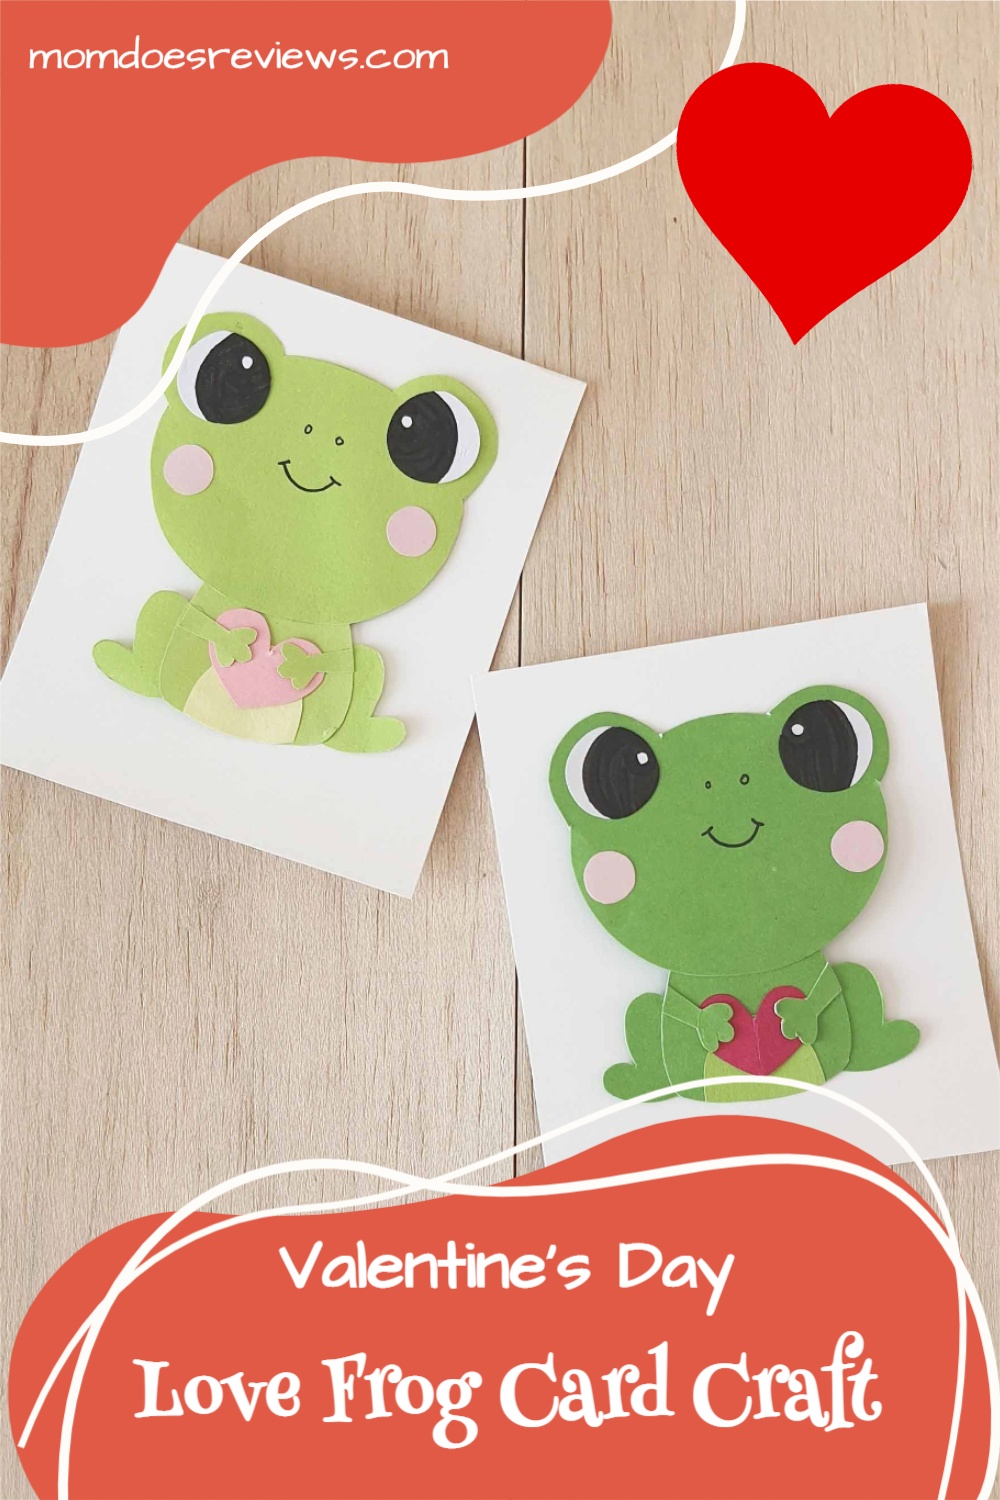 Love Frog Card Craft